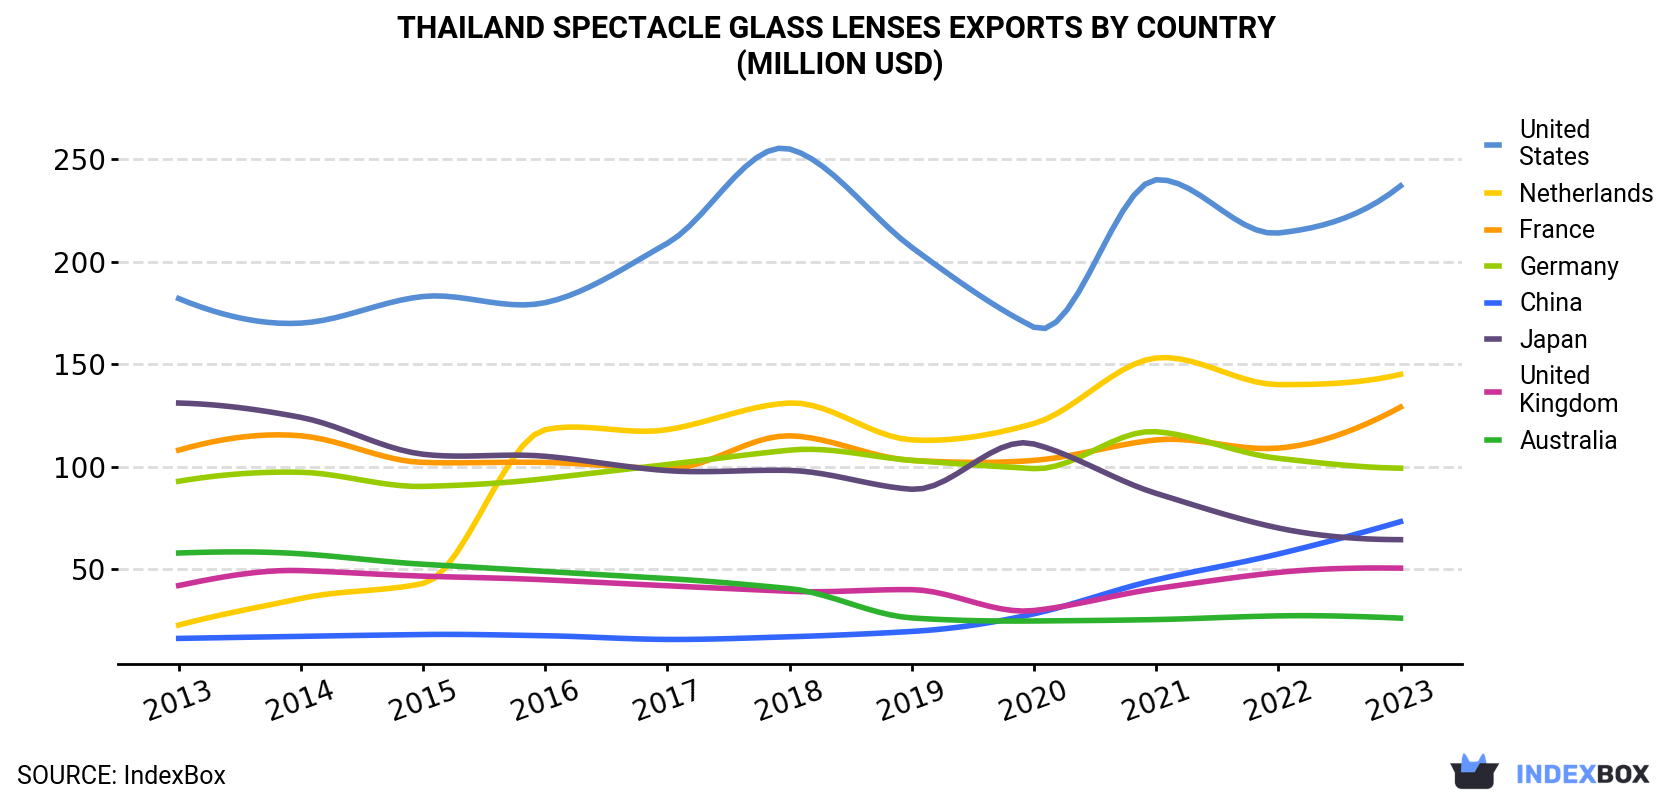 Thailand Spectacle Glass Lenses Exports By Country (Million USD)